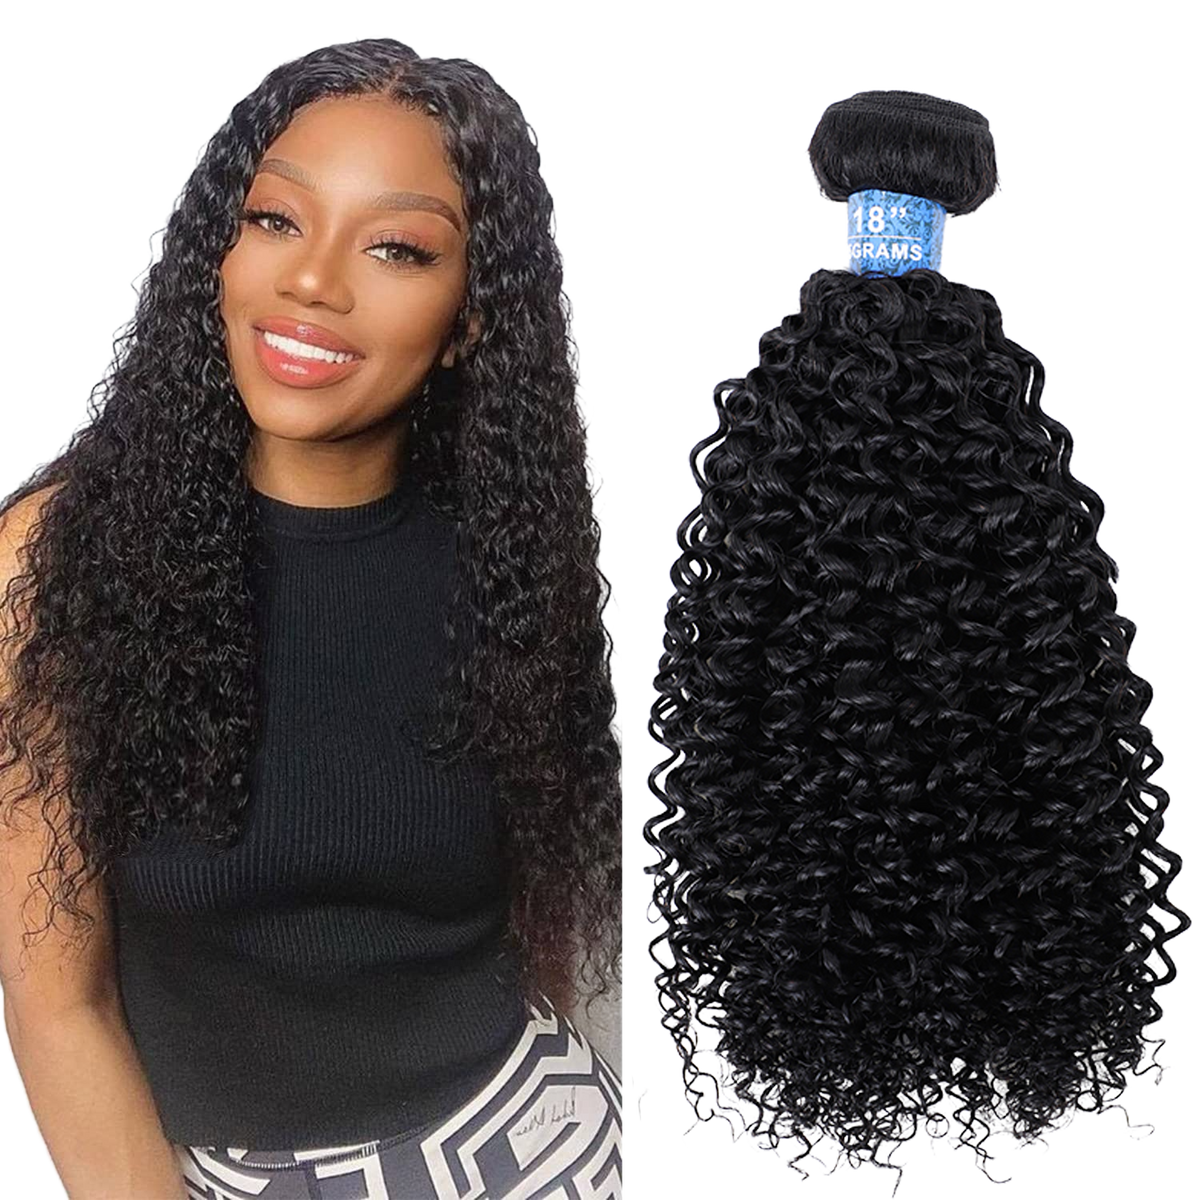 10A  Curly Single Bundles Human Hair Brazilian Virgin Hair Jerry Curly Wave Weave One Bundle 10A Grade Unprocessed Hair Extensions Natural Black （1 pack）